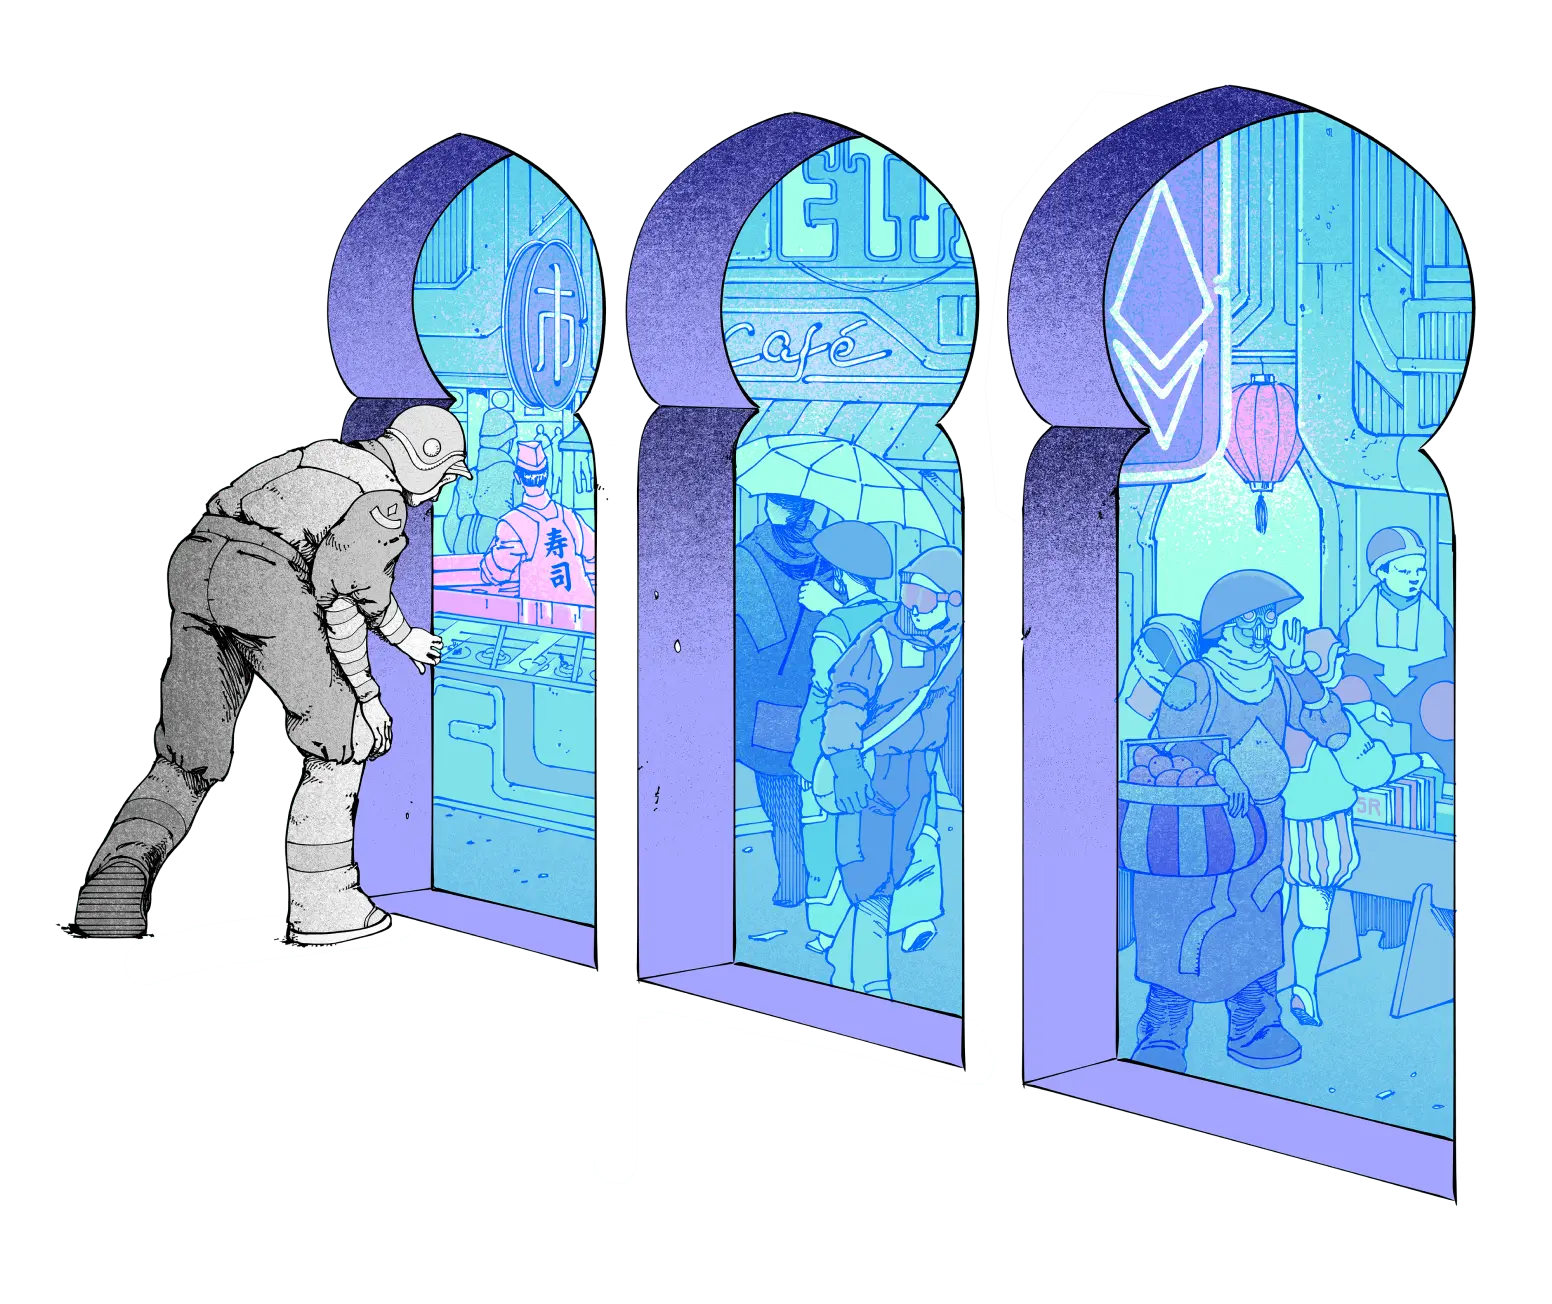 Illustration of a person peering into a bazaar, meant to represent Ethereum